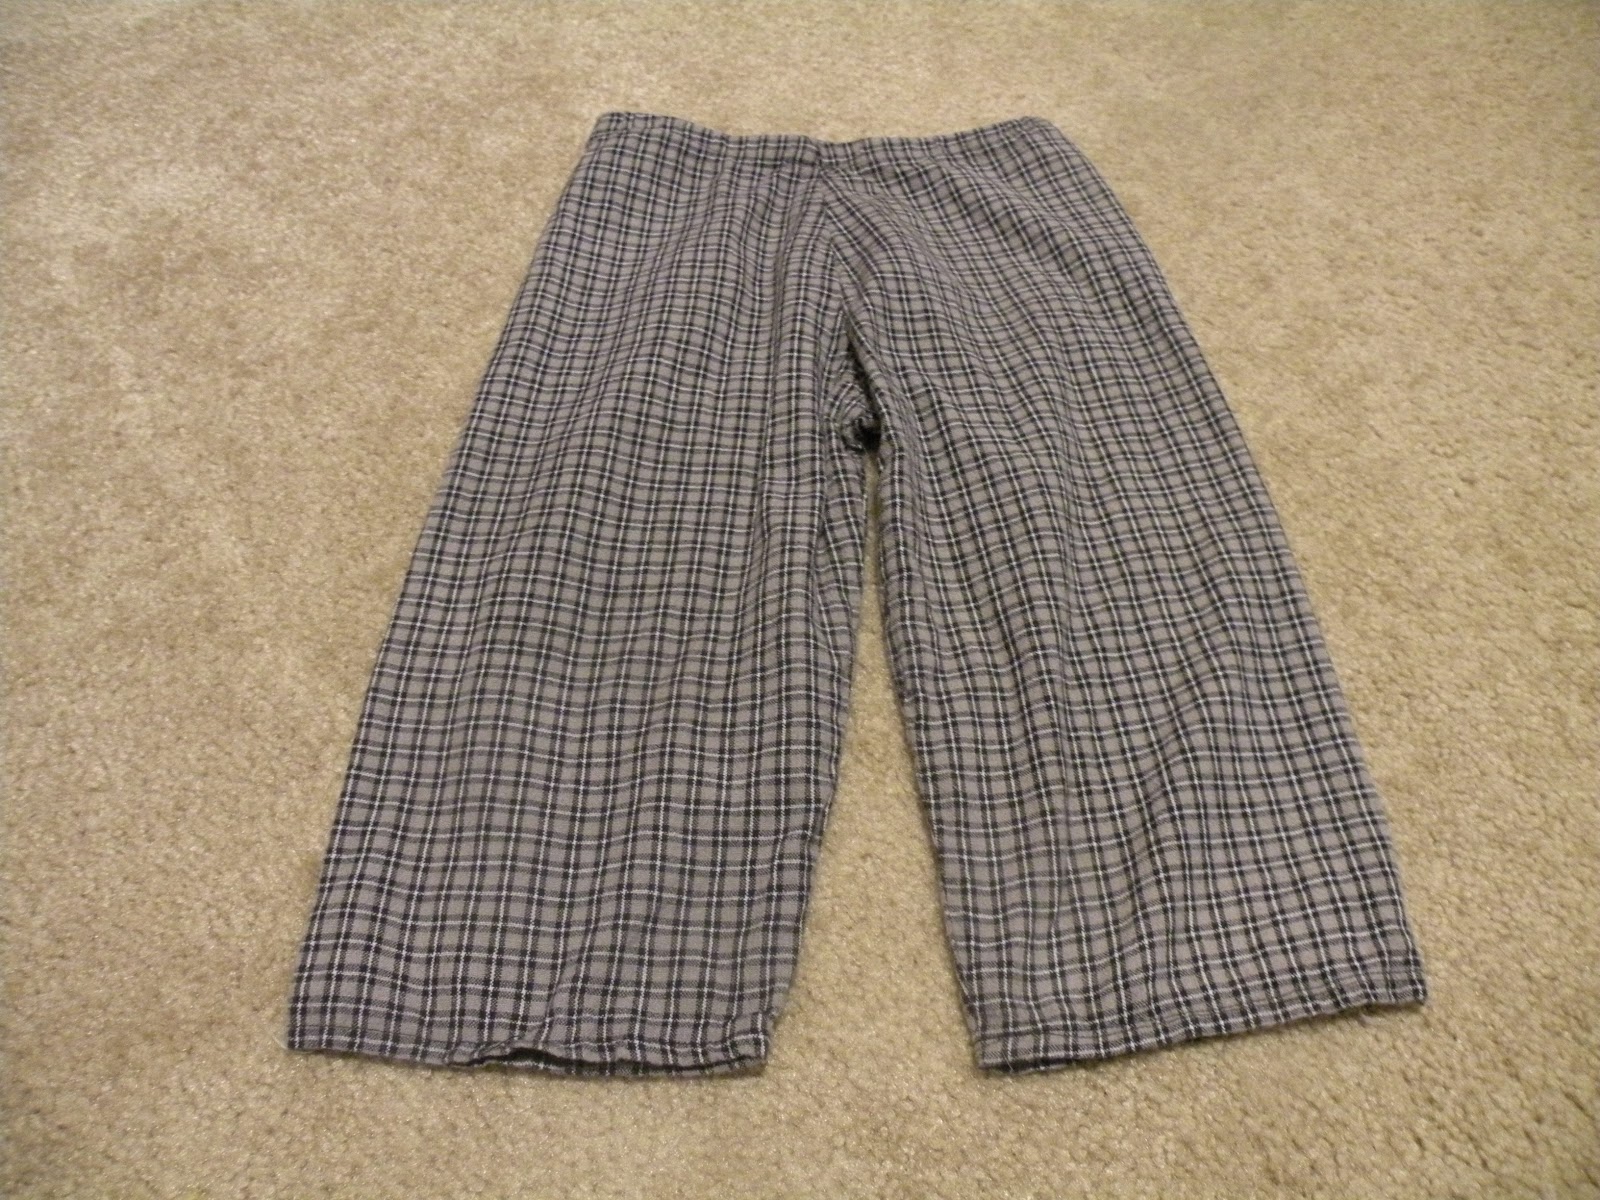 Pajama Pants For Little Ones - Life After Laundry